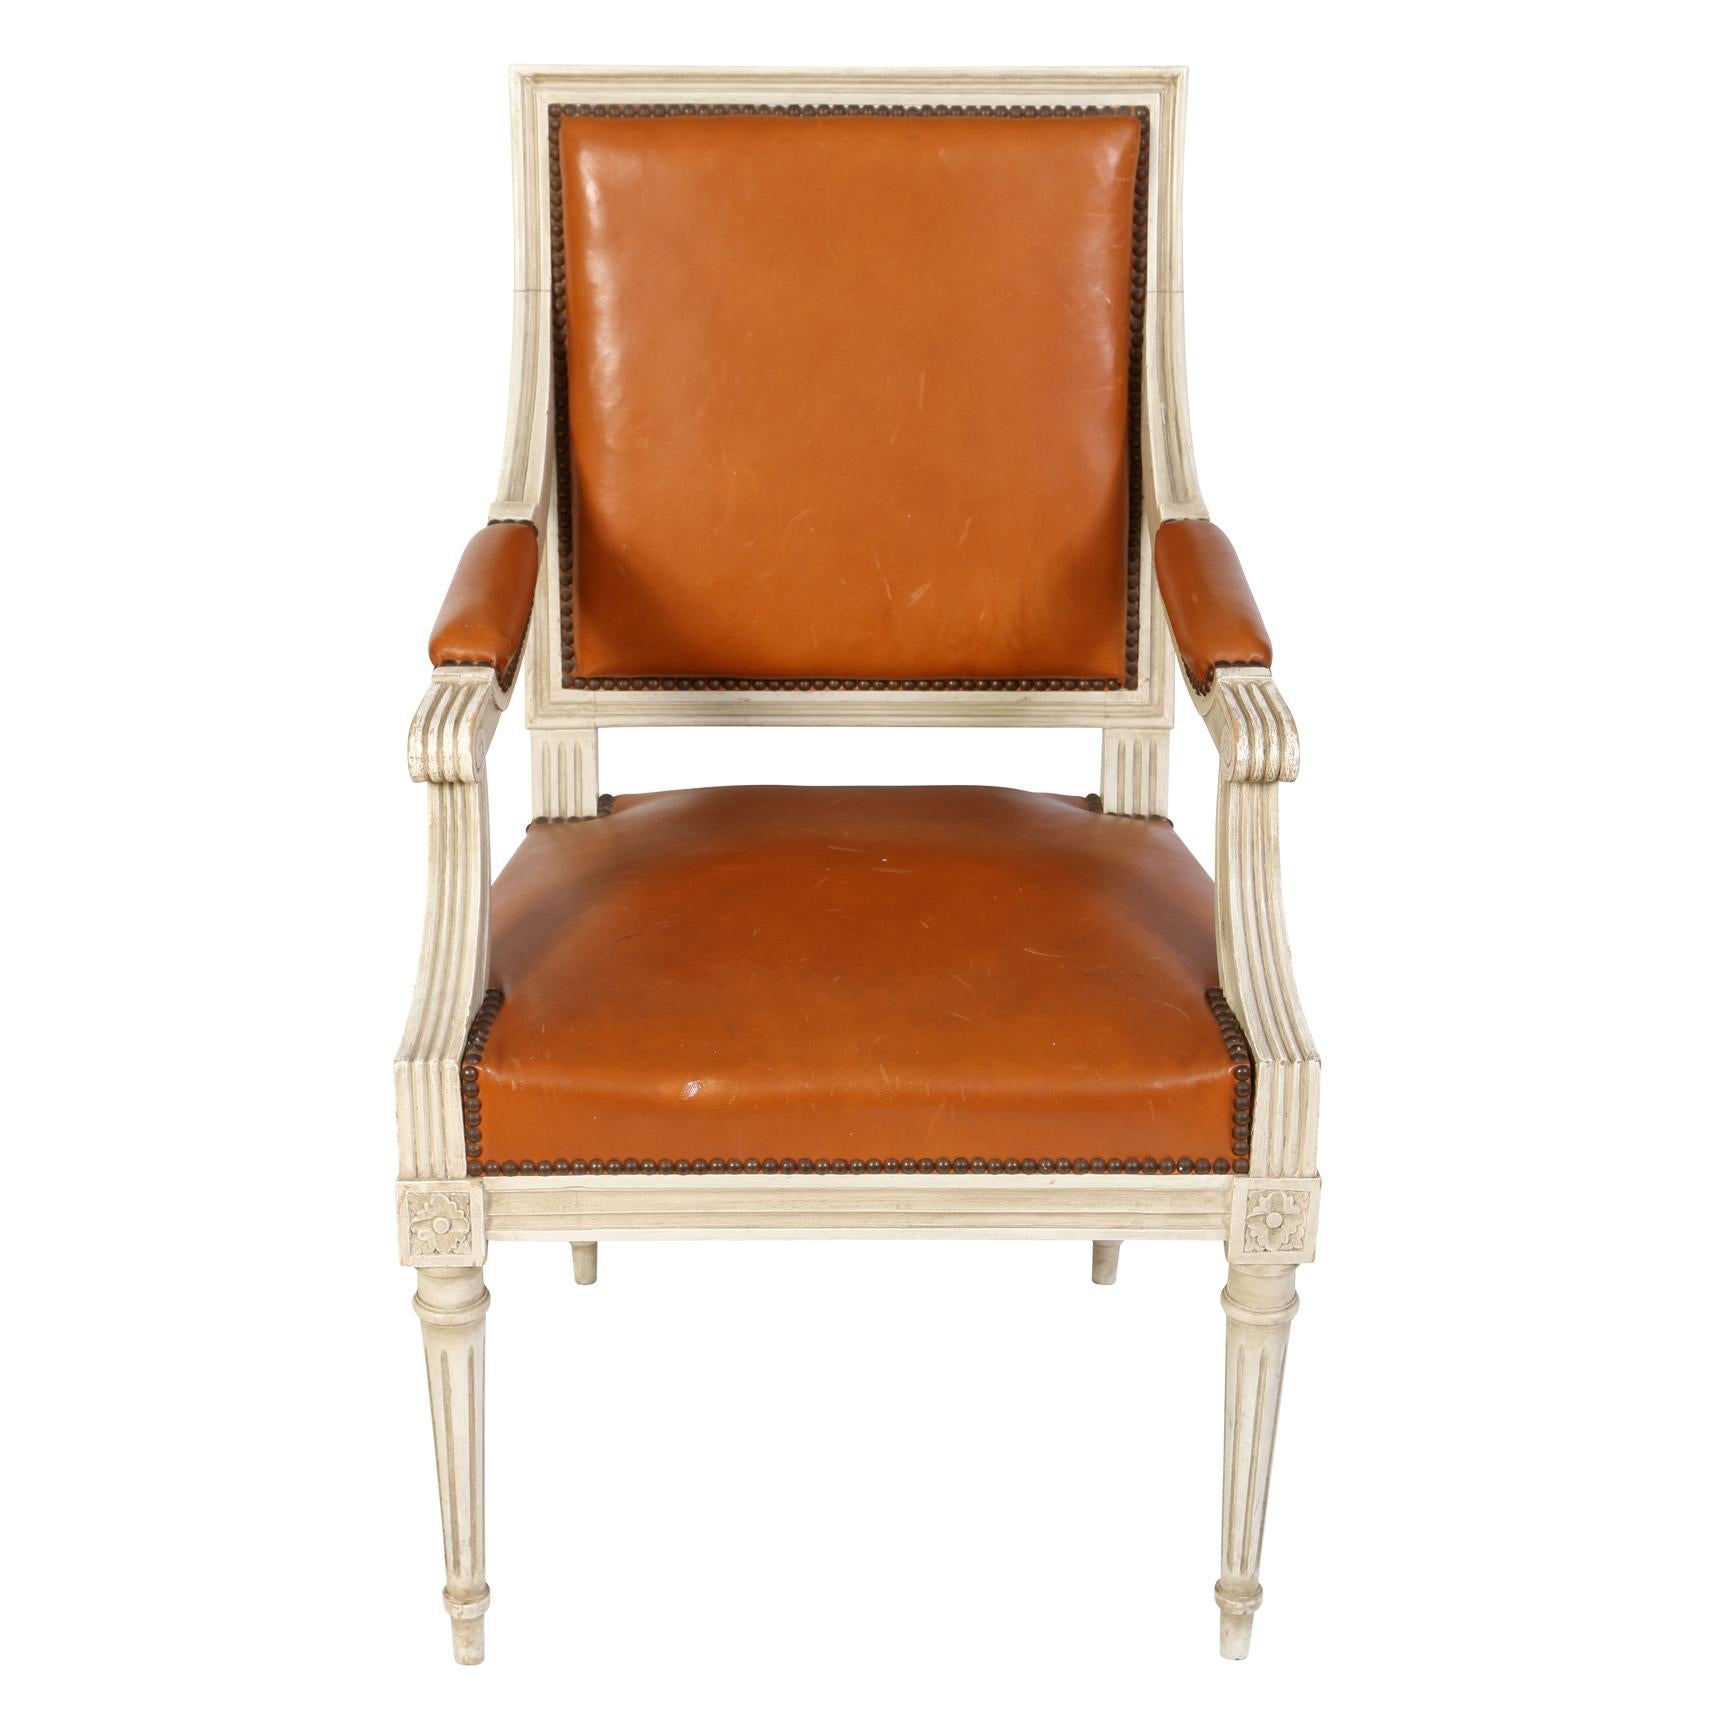 A pair of painted white and carved Louis XV style arm chairs with orange leather seats, backs and arm rests and nail head trim to square shaped backs.